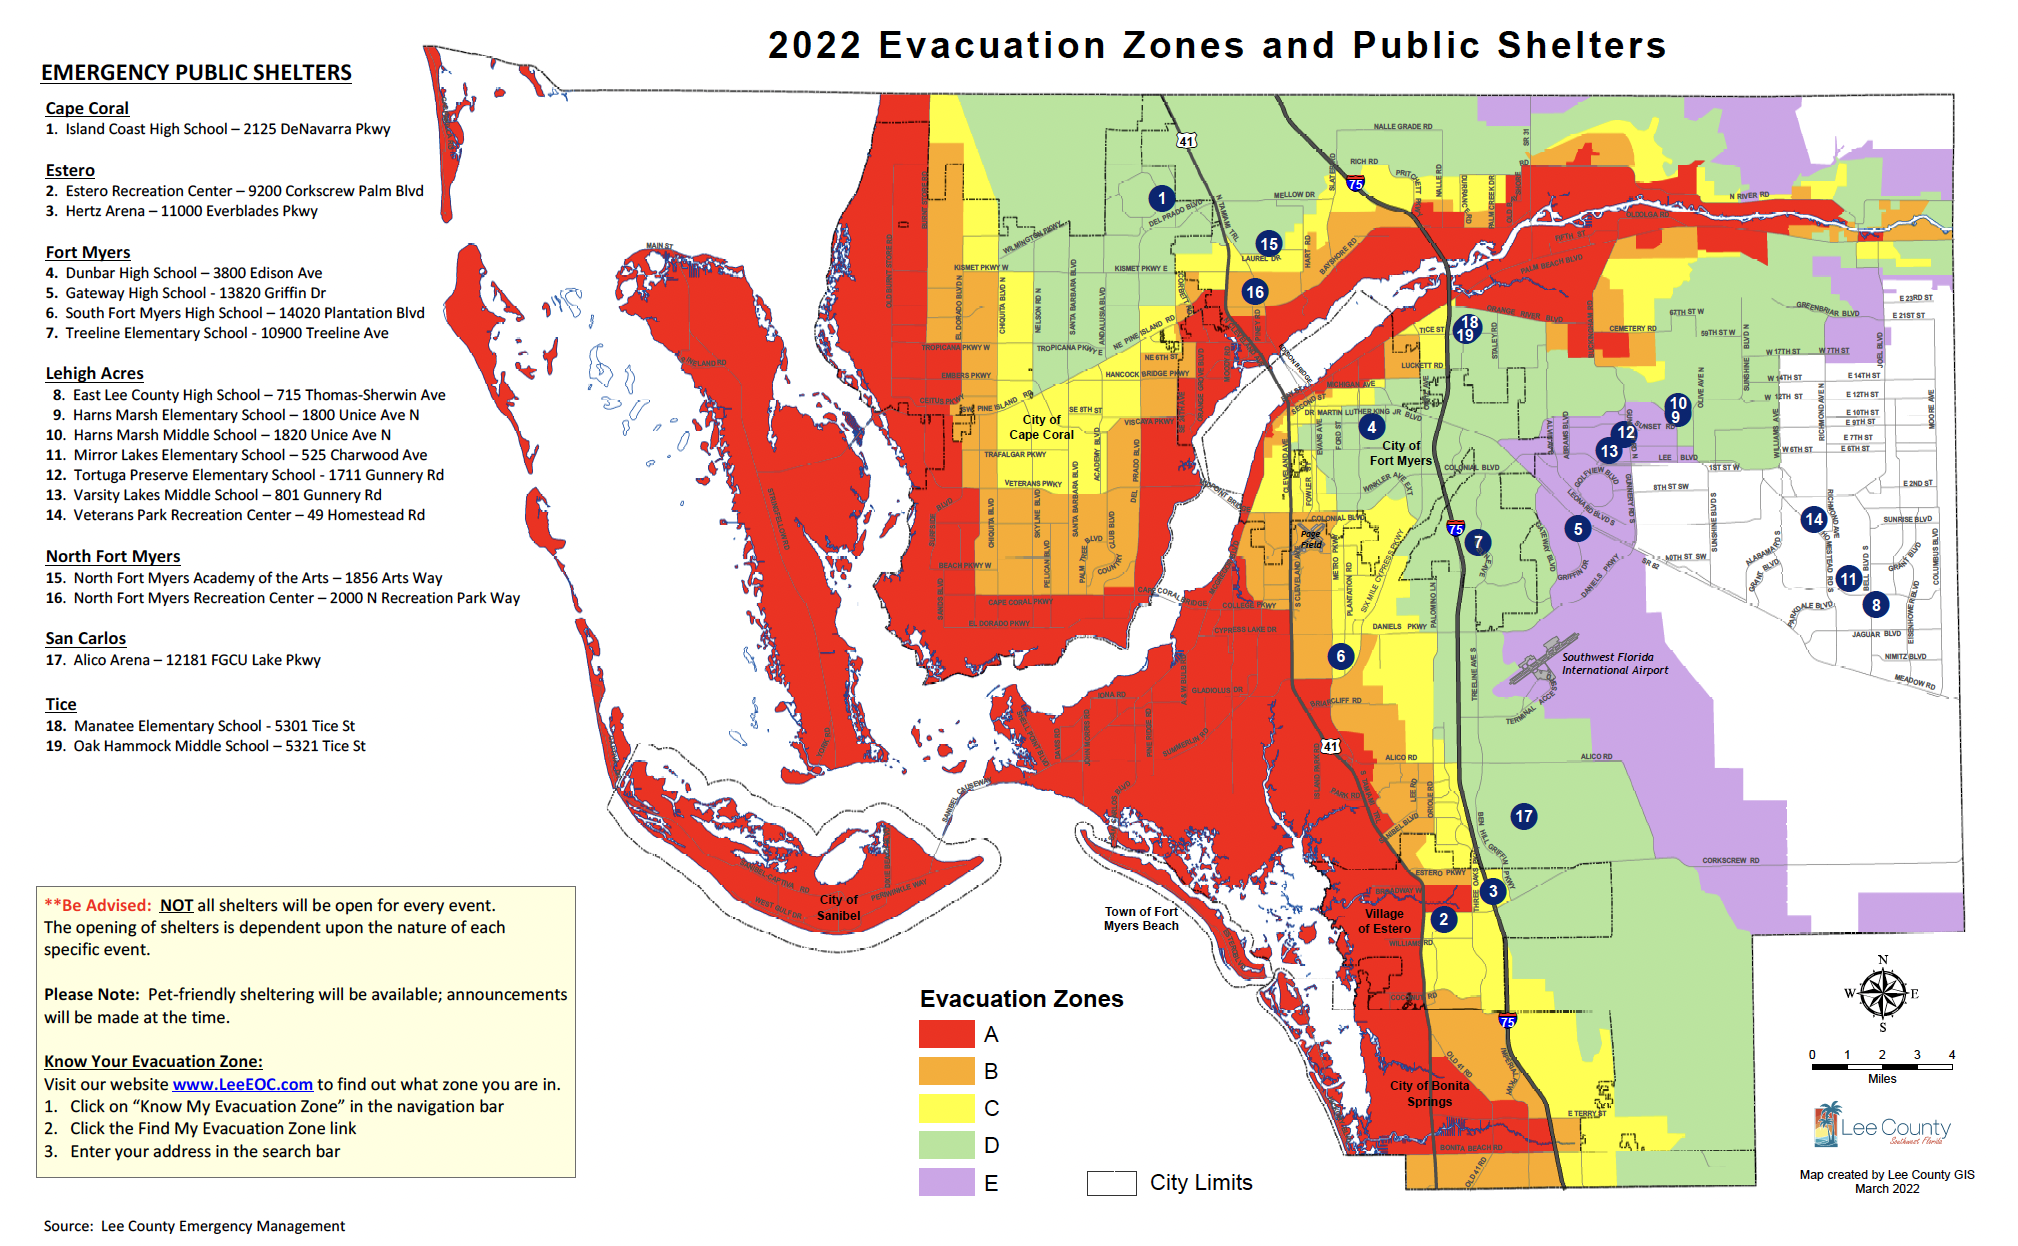 This image shows a map of the Lee County storm surge evacuation zones.